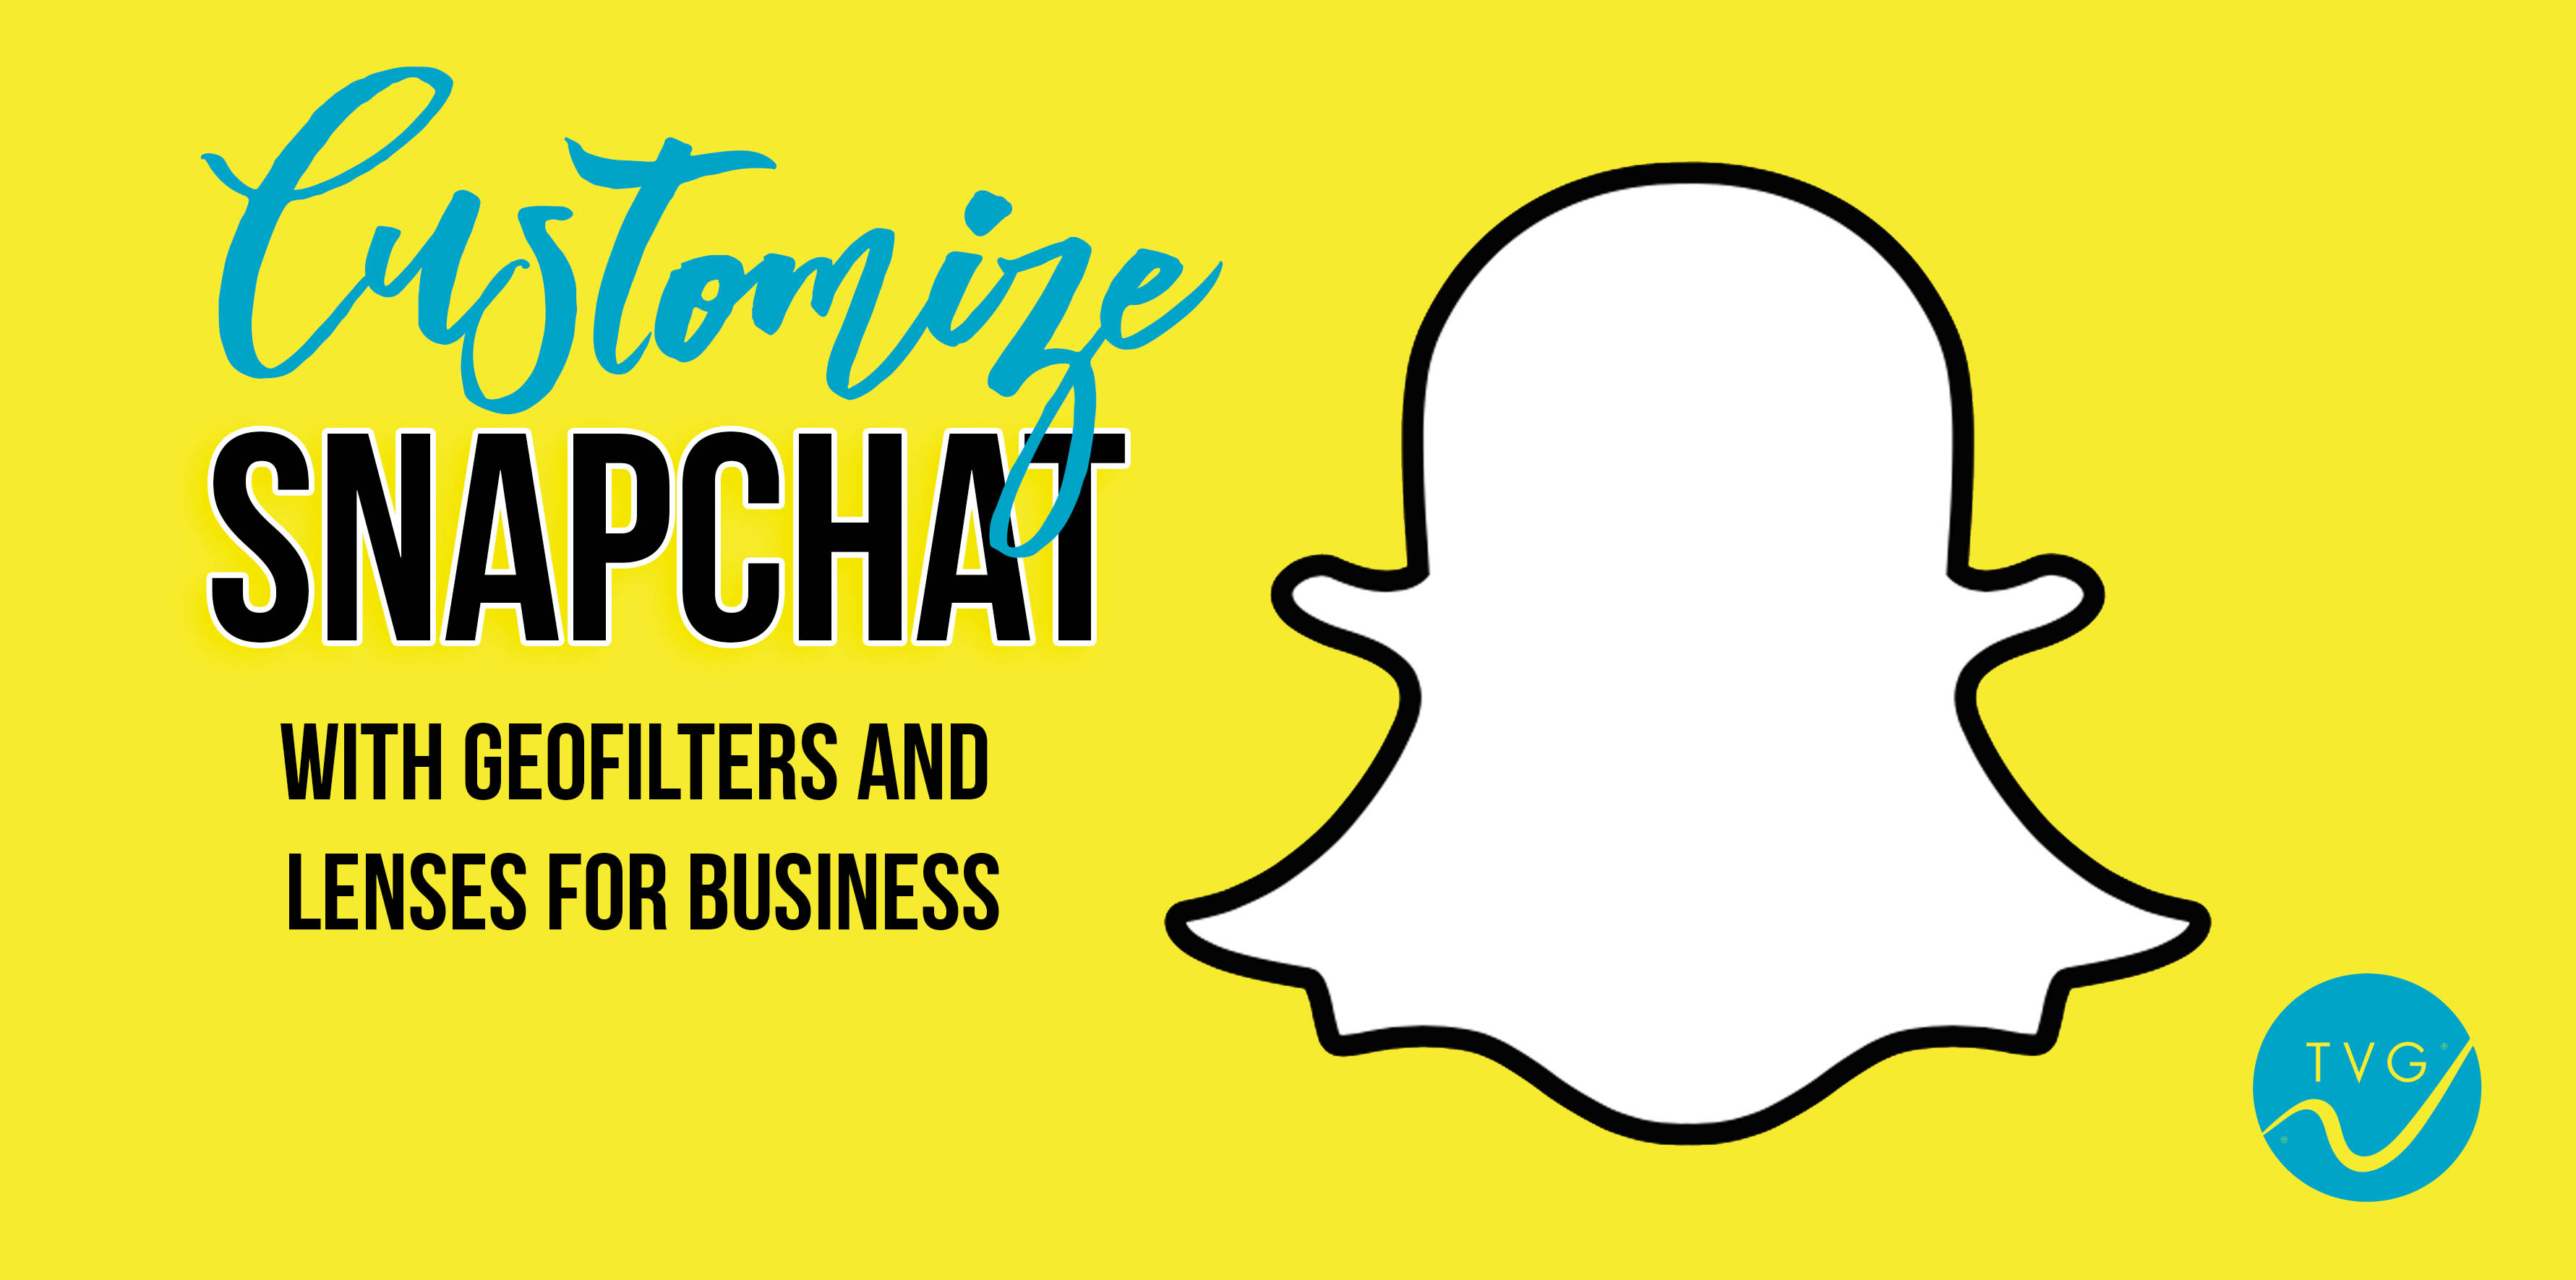 Snapchat's Fantastic Filters and How to Use Them - The Vandiver Group